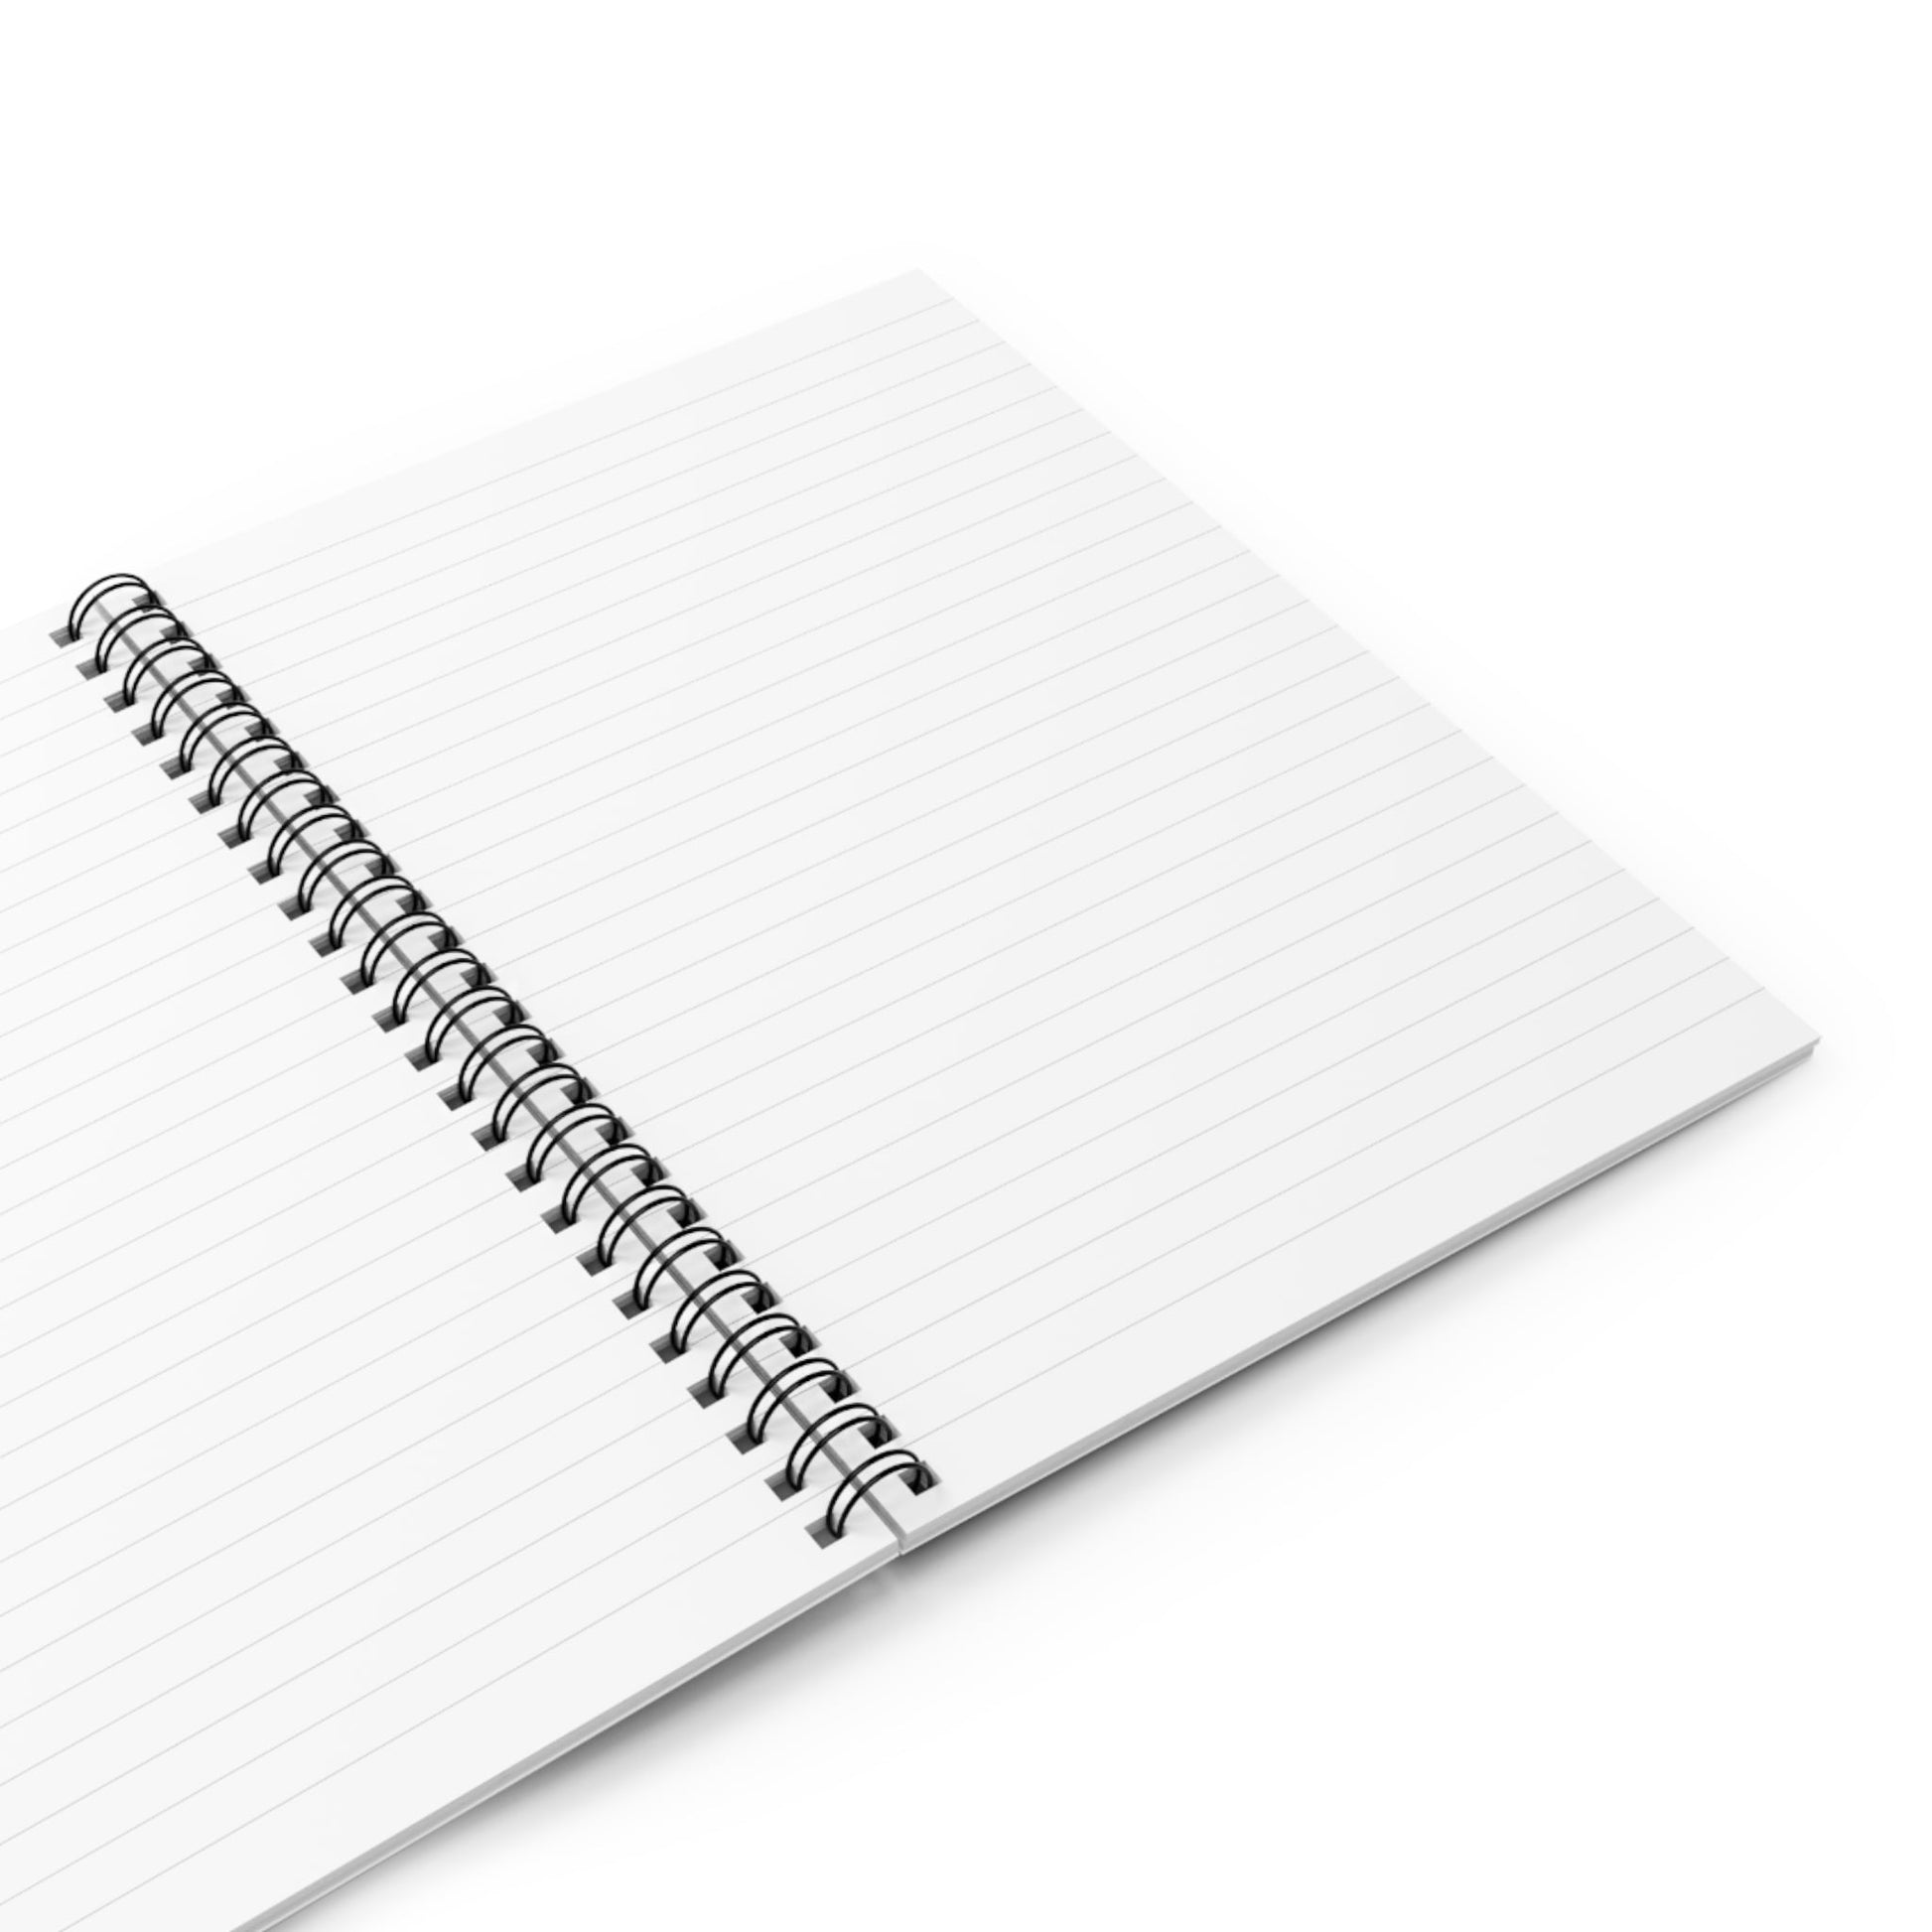 Spiral Notebook with Canada Landscape Cover Opened with Blank White College Ruled Pages